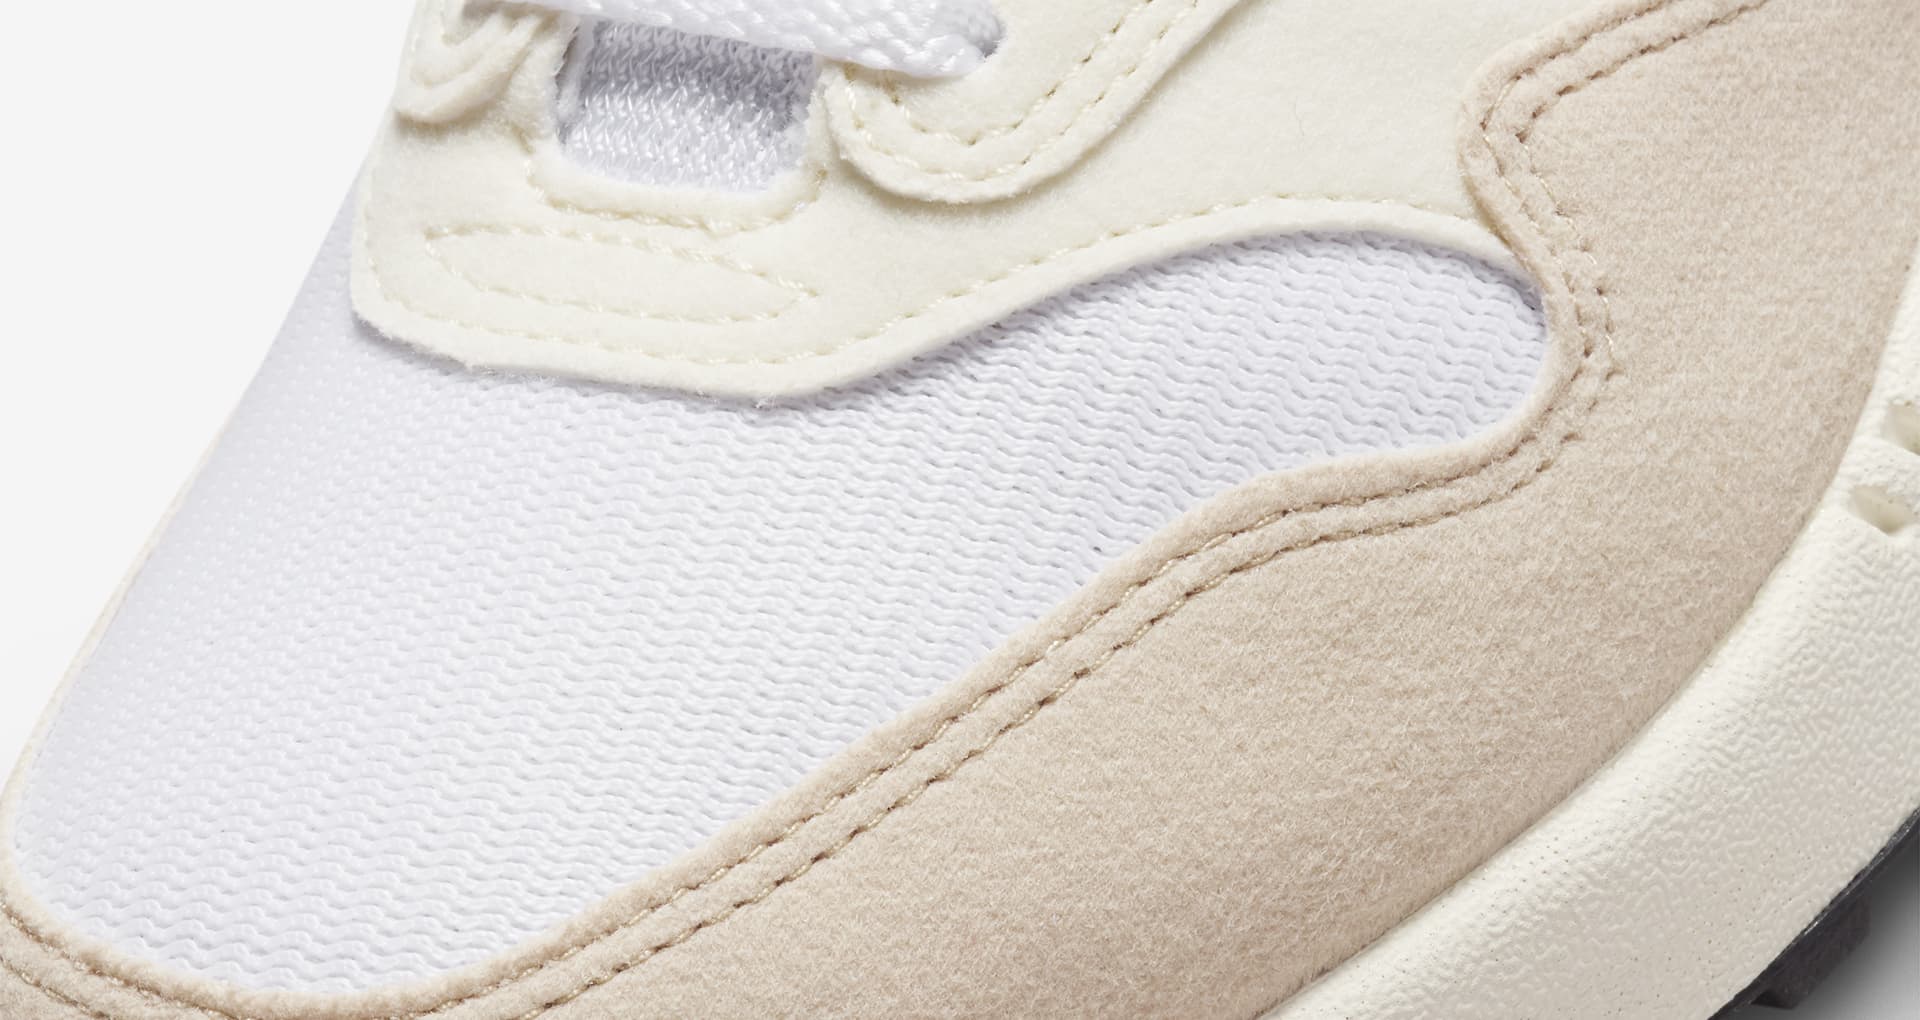 Women's Air Max 1 'Pale Ivory' (DZ2628-101) release date . Nike SNKRS SG